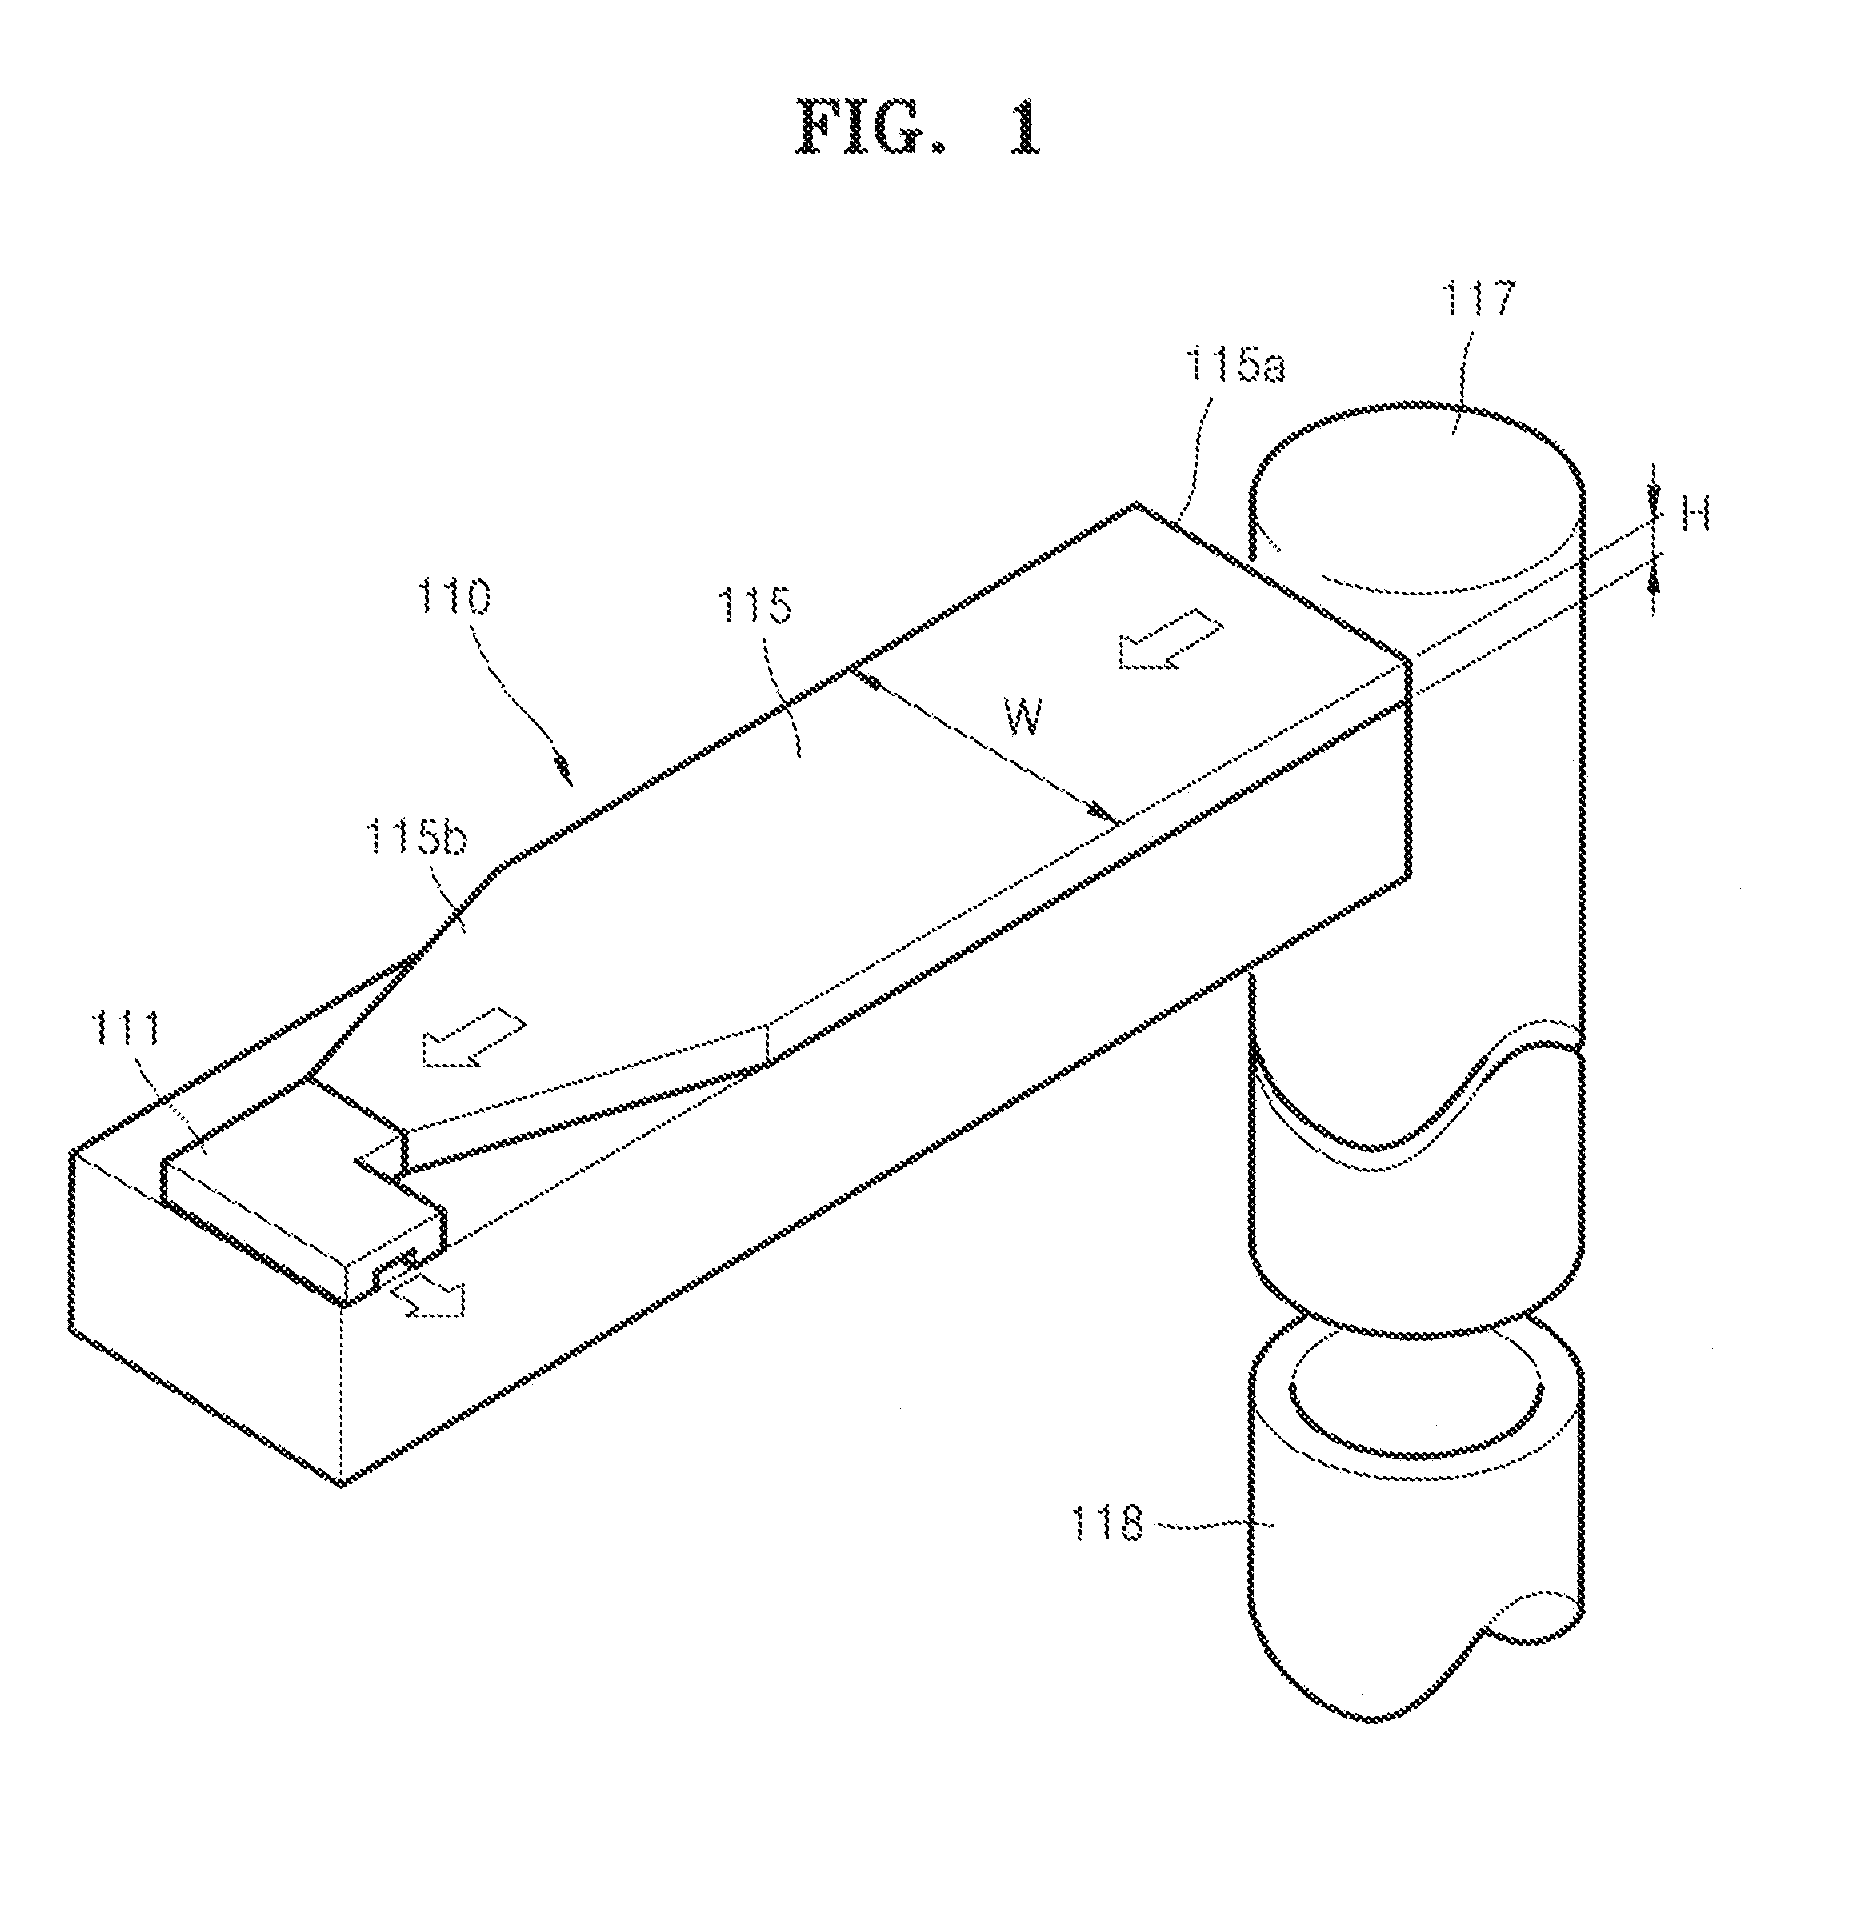 90°-bent metallic waveguide having tapered c-shaped aperture, method of fabricating the waveguide, light delivery module including the waveguide, and heat assisted magnetic recording head having the waveguide